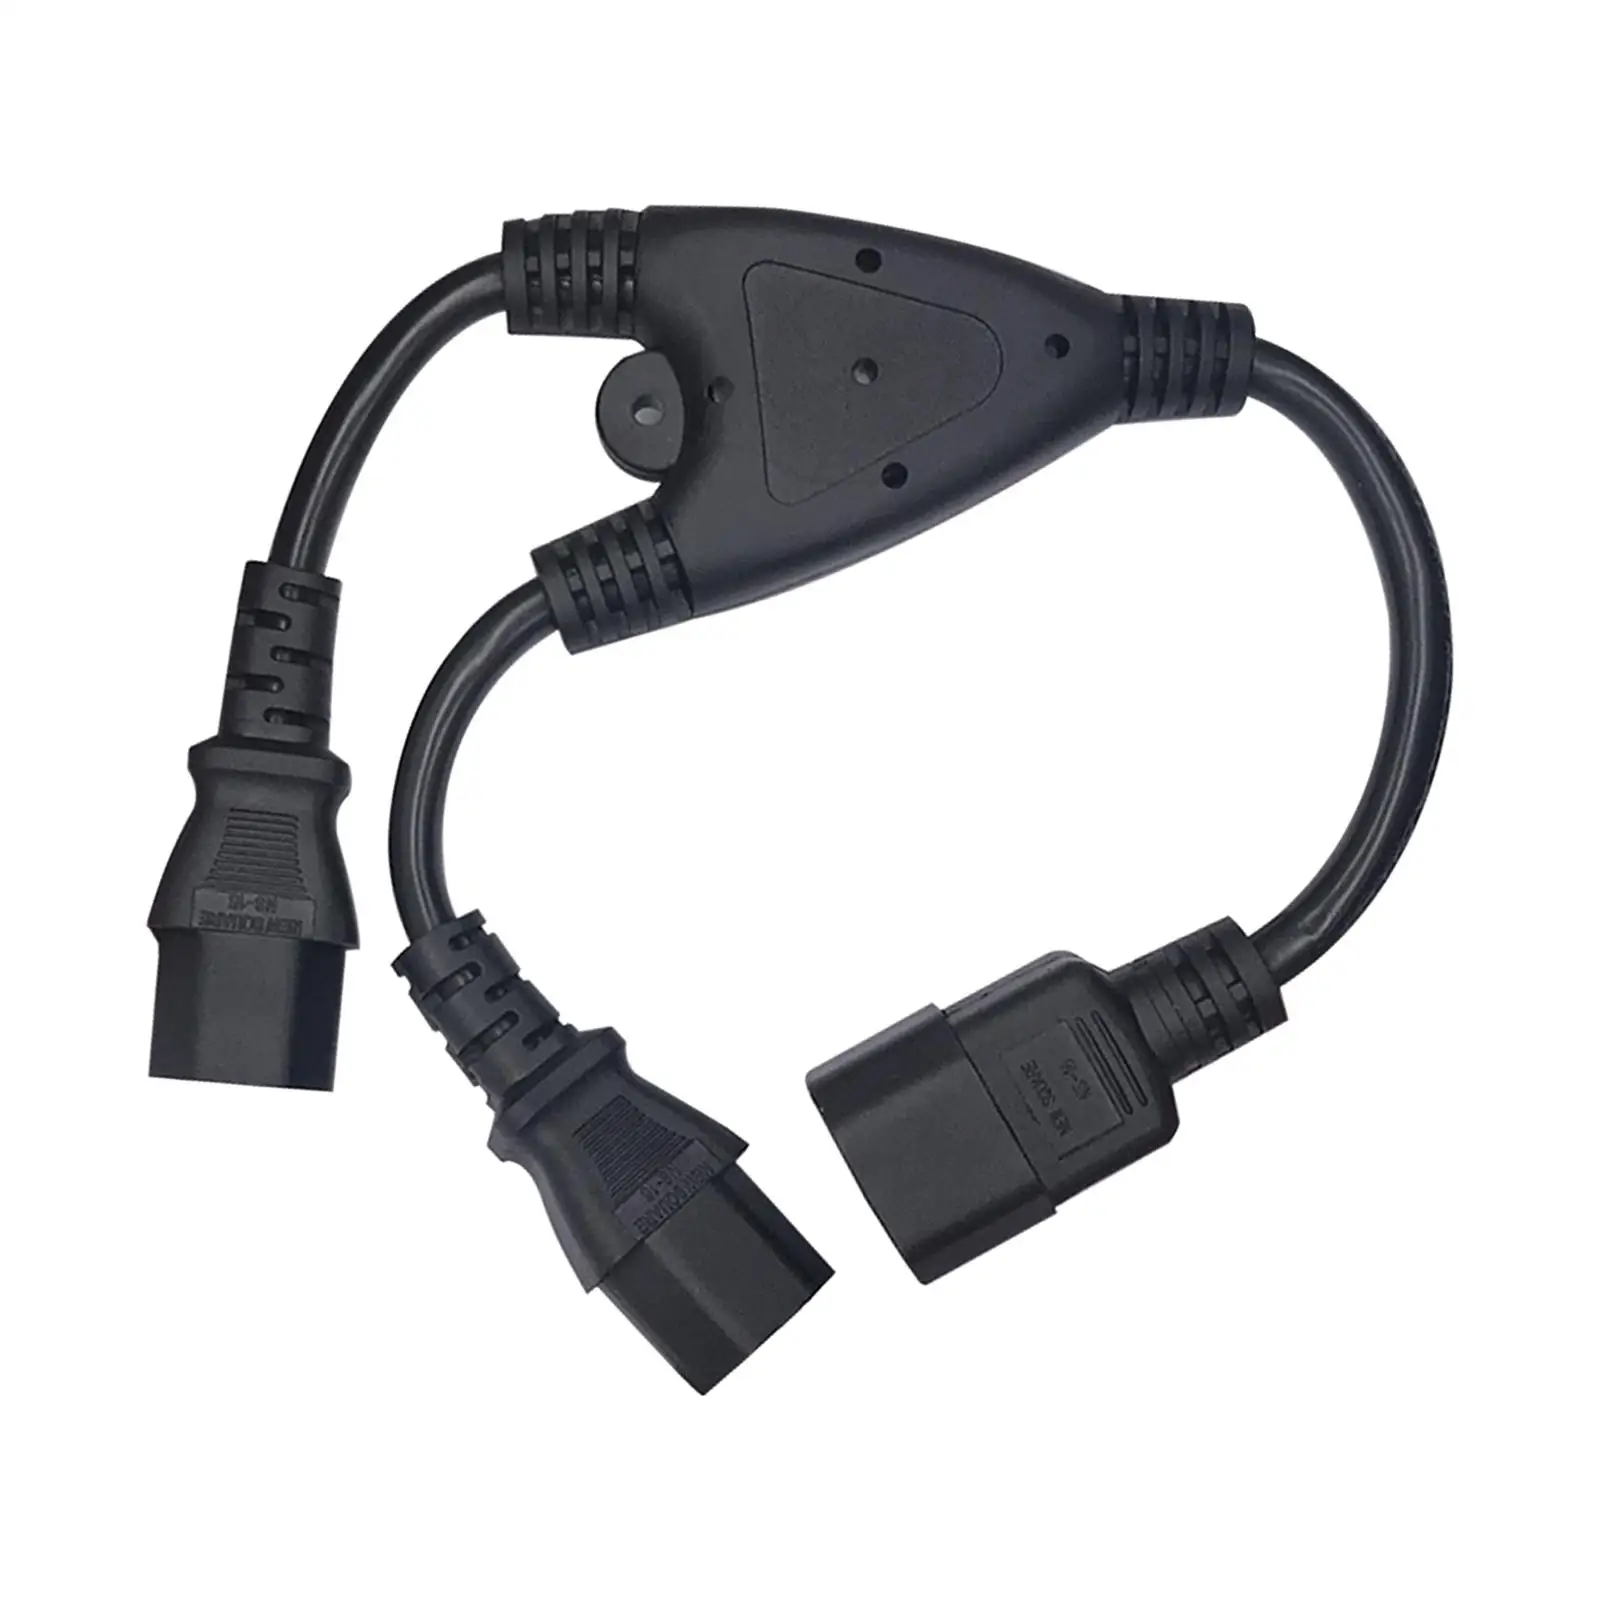 Ups Server Y Splitter C14 to 2 C13 Power Cord 10A 2500W for Scanner